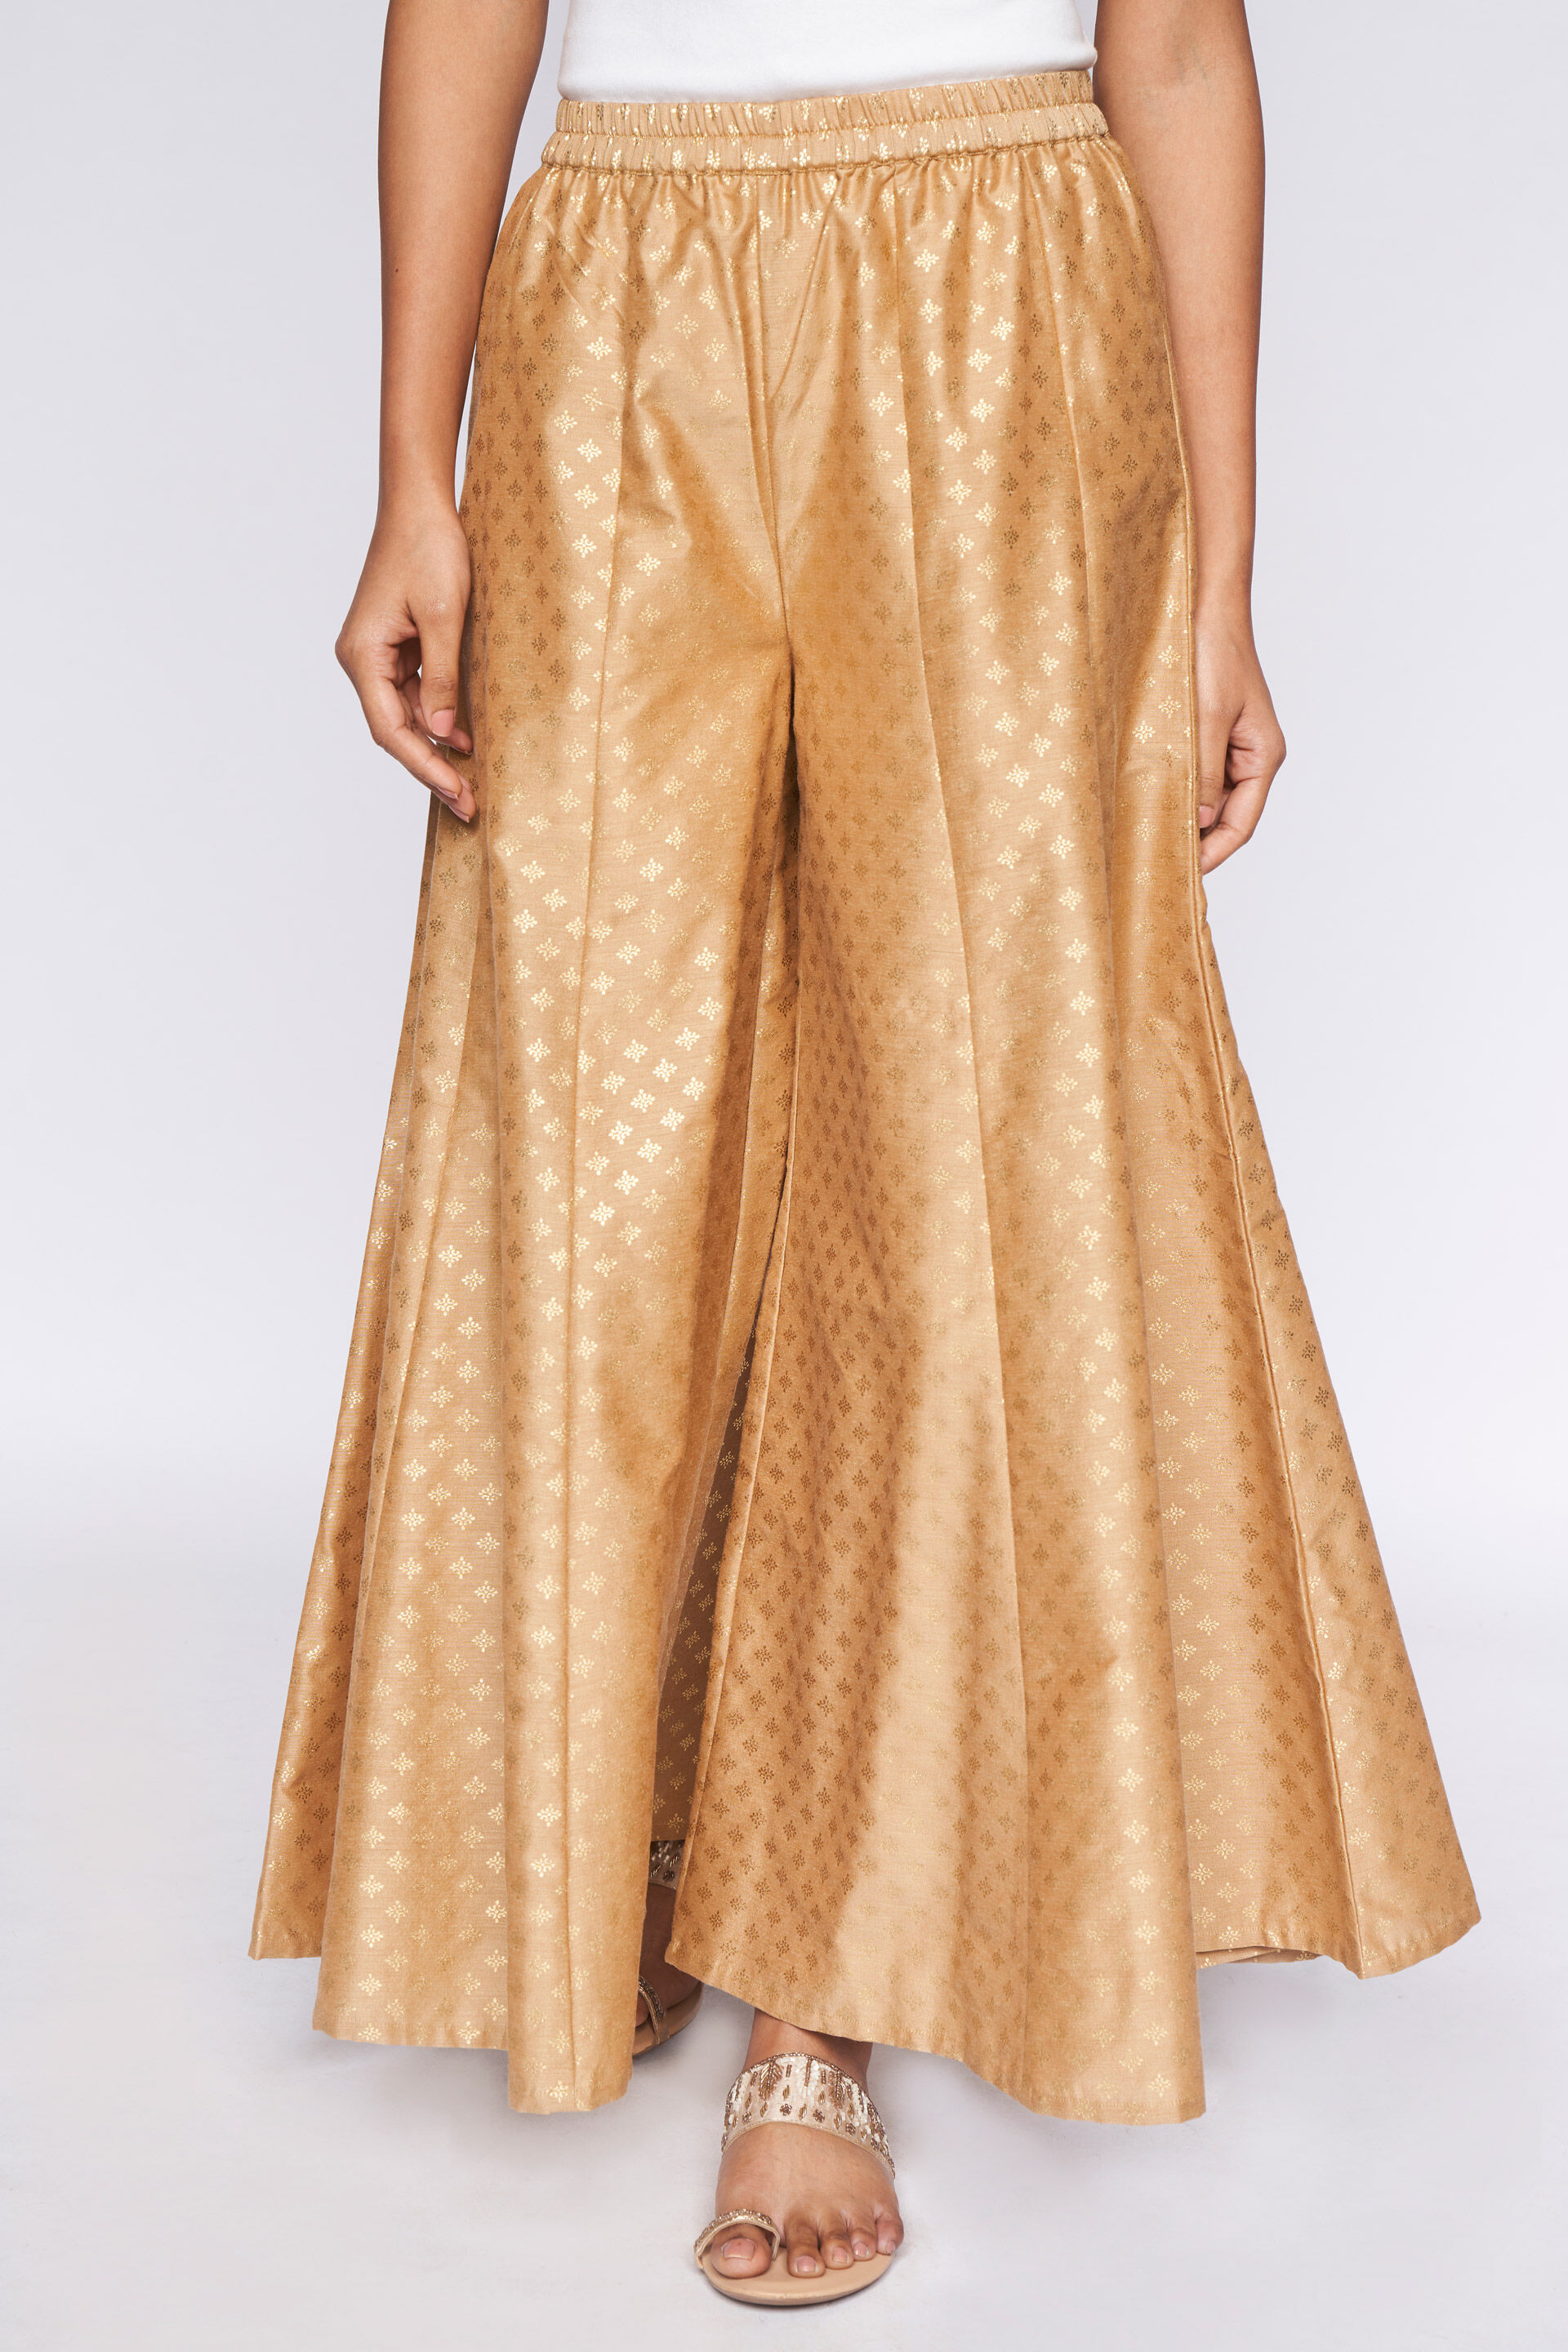 Buy Gold Salwars & Churidars for Women by GO COLORS Online | Ajio.com